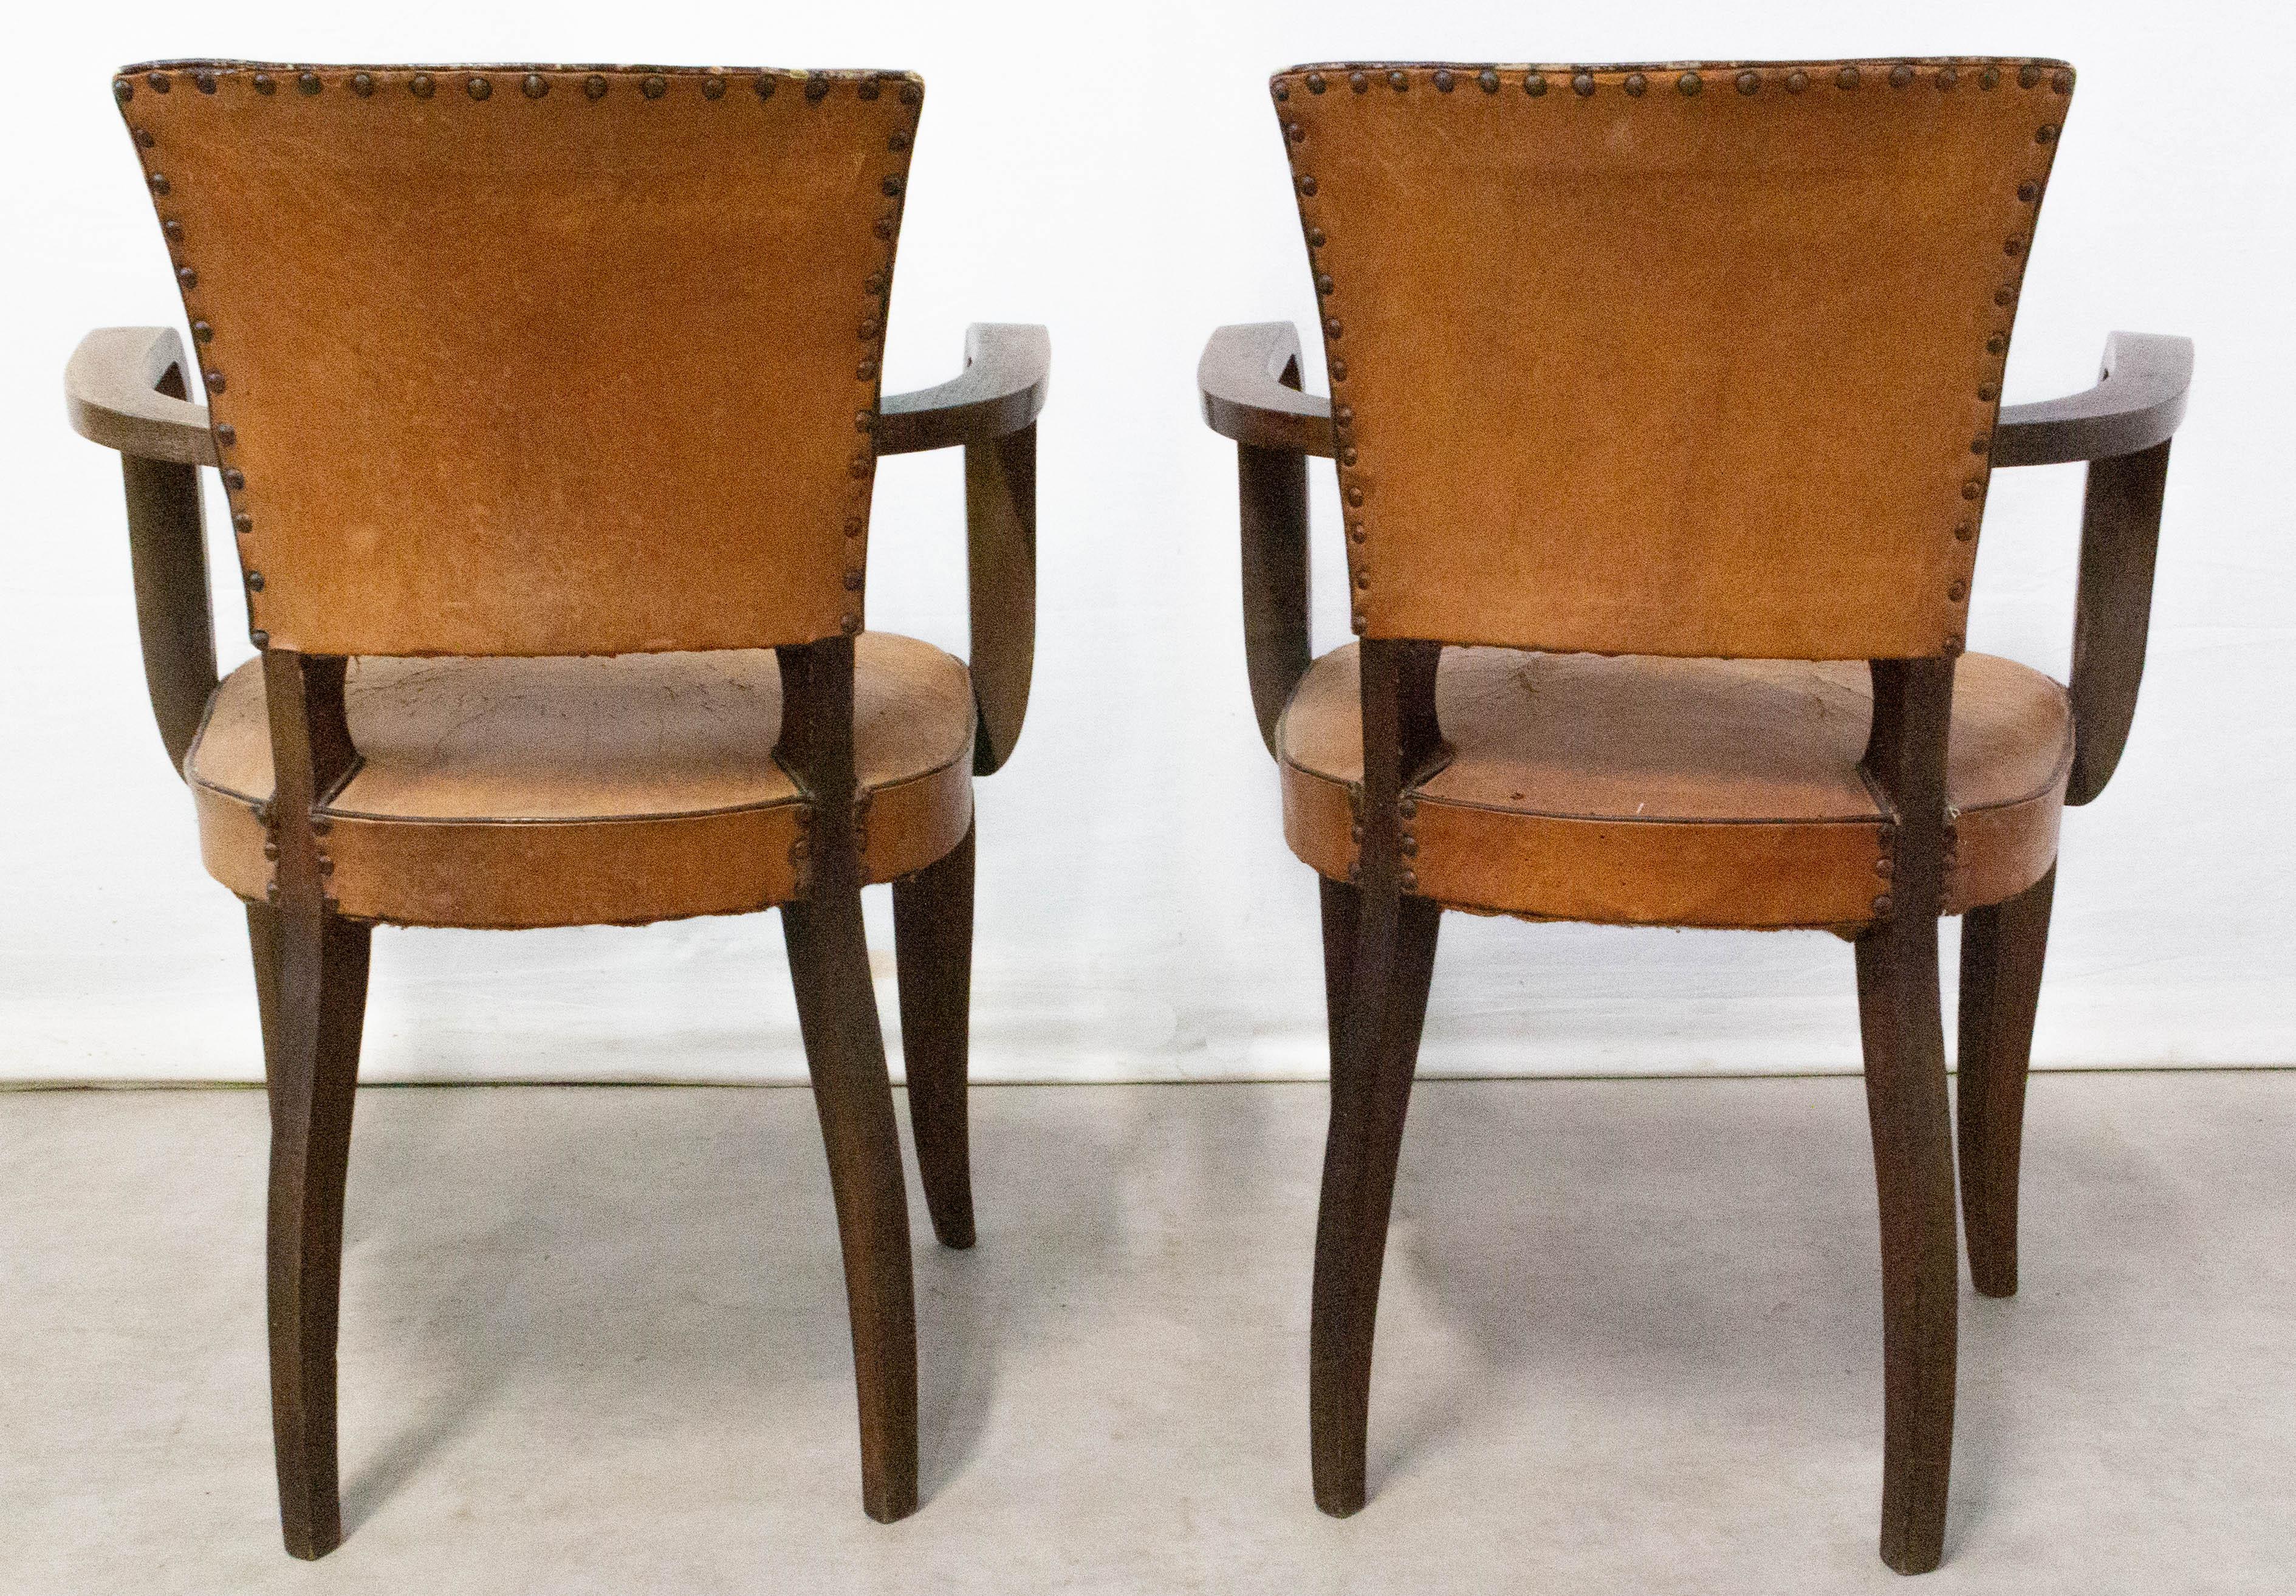 Pair of Bridge Chairs Leather French Art Deco circa 1930, to be Re-Upholstered 1